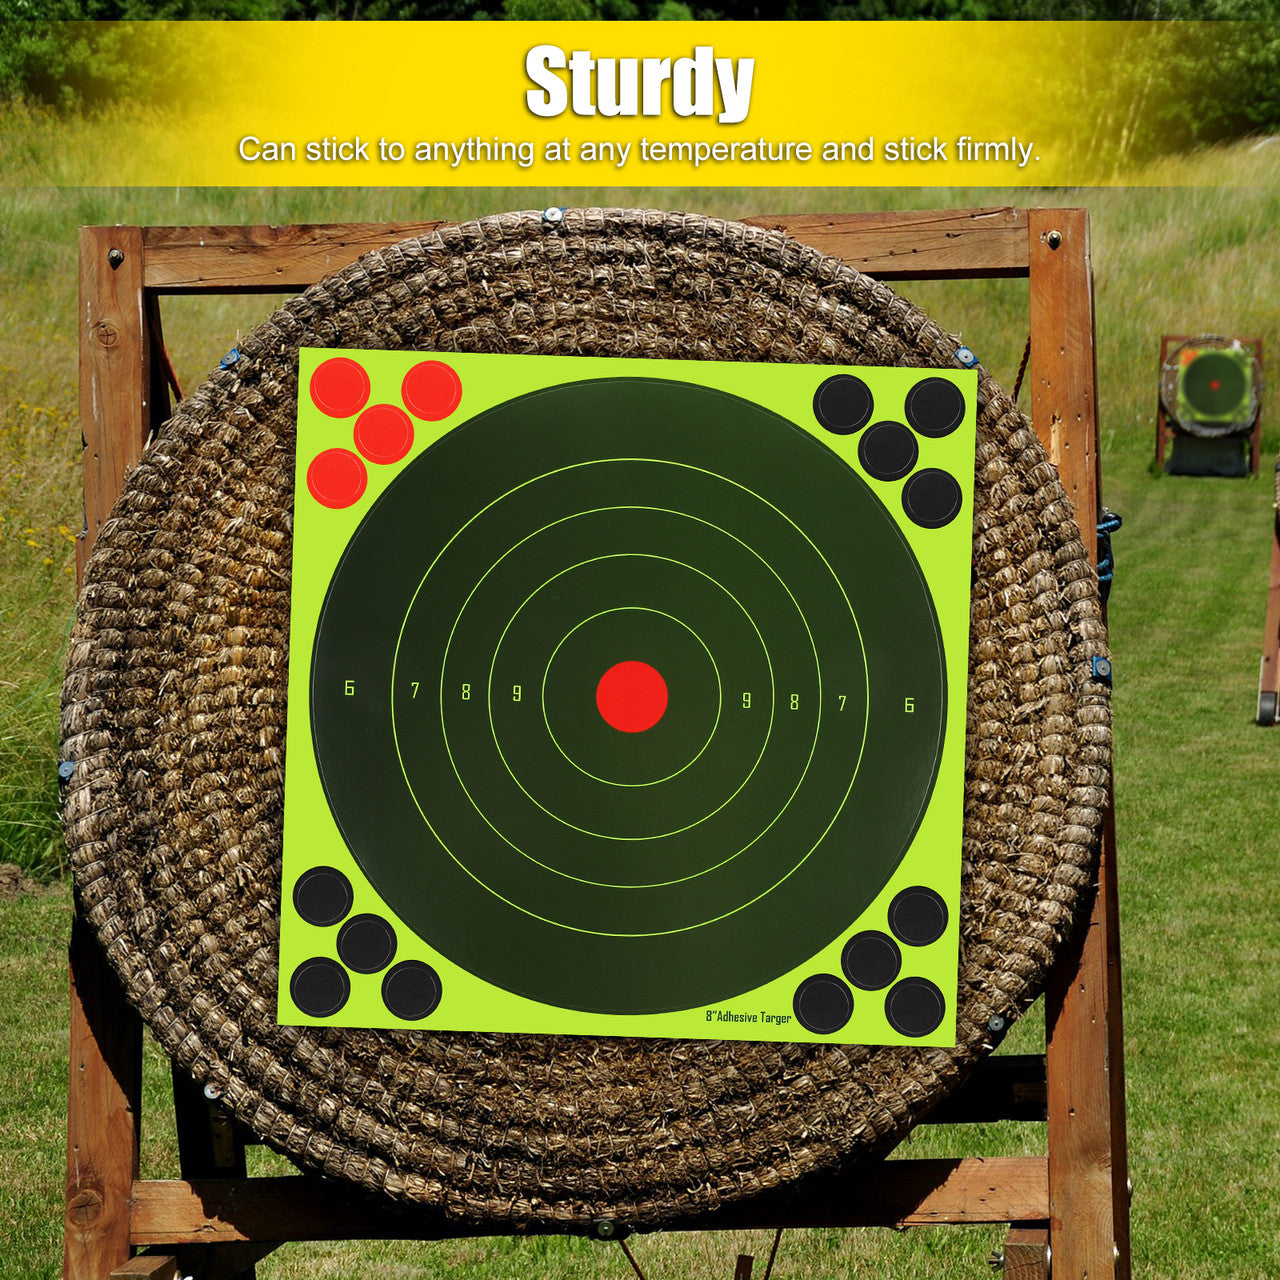 25 Packs 8” Target Paper-Stick Splatter Reactive Targets, Paper Target with Cover-up Patches for Gun, Pistol, Air Rifle: Sports & Outdoors